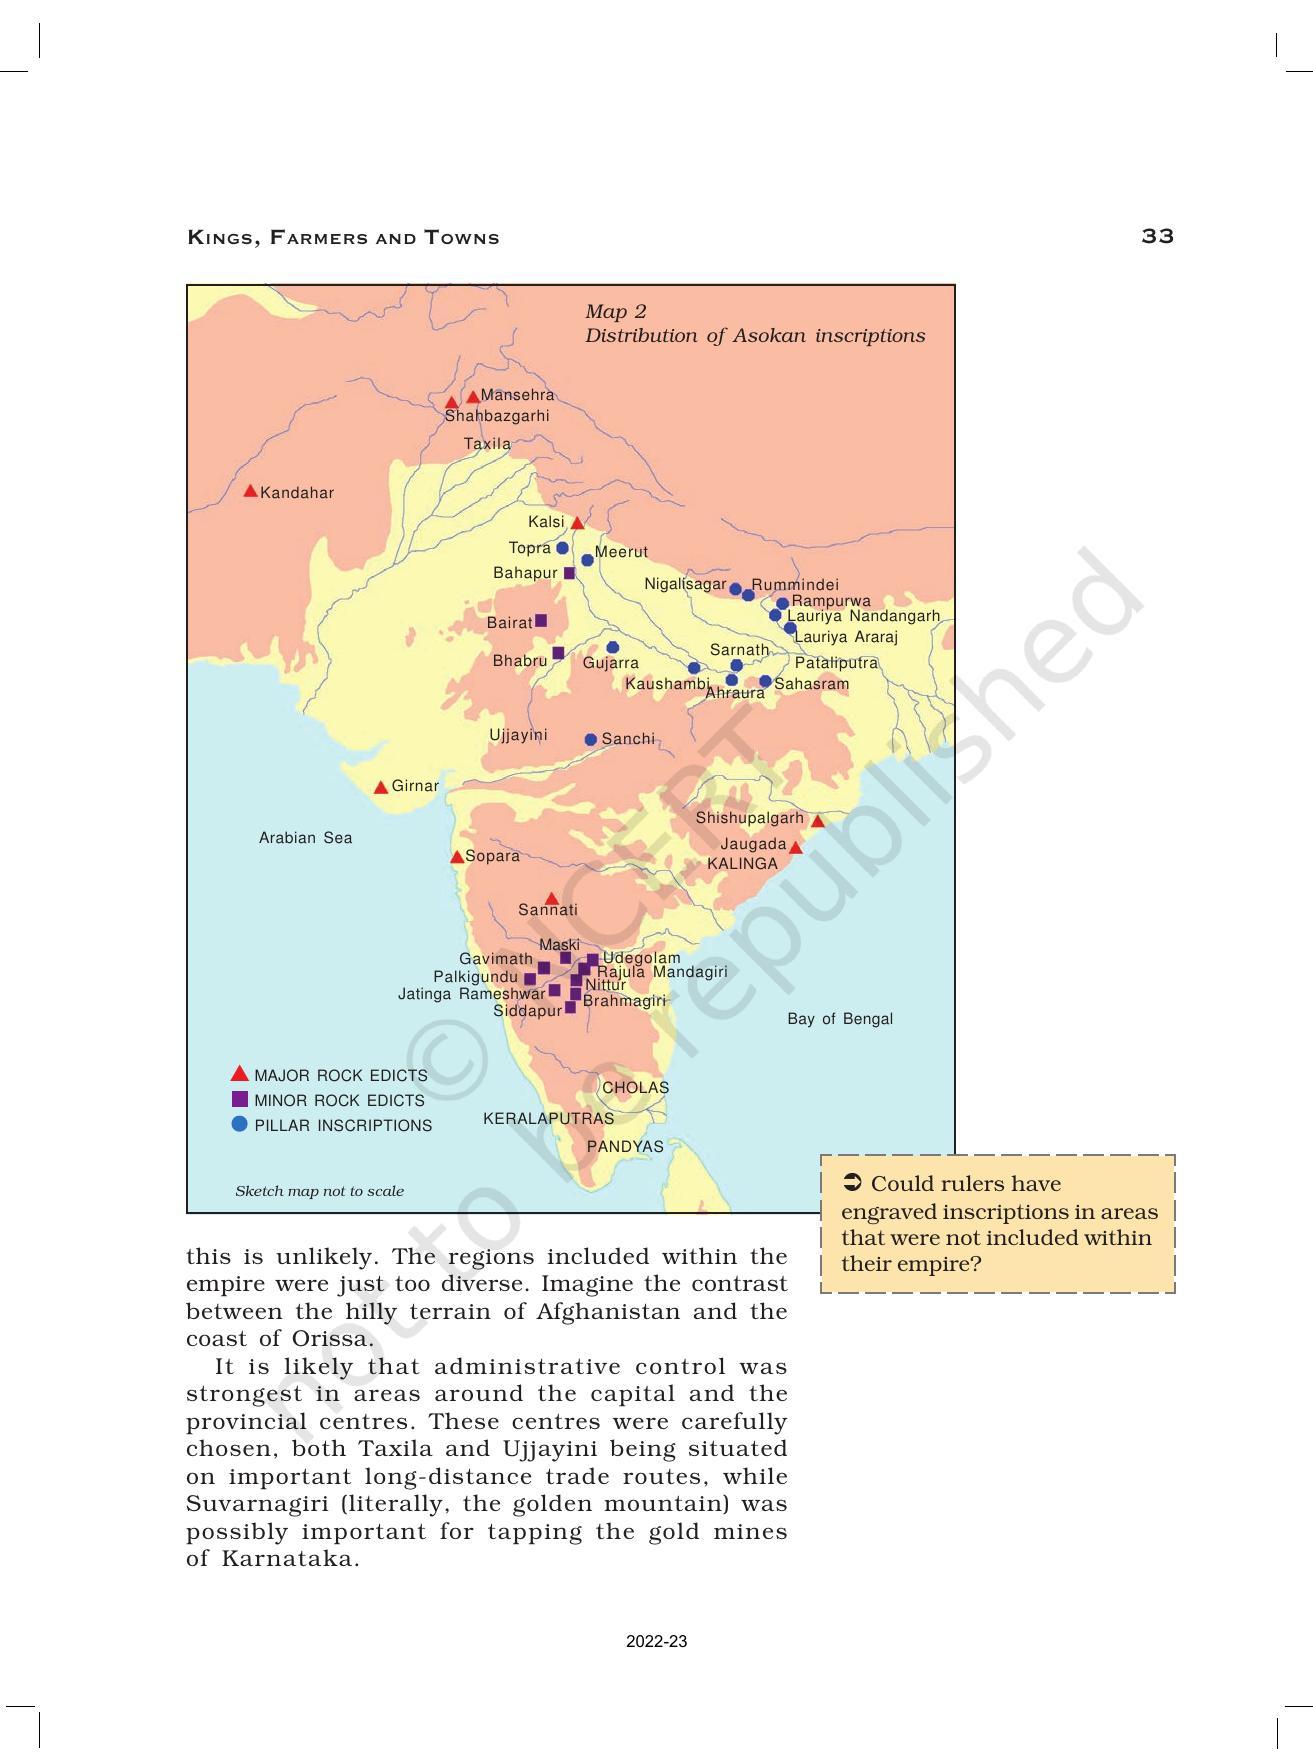 NCERT Book for Class 12 History (Part-1) Chapter 2 Kings, Farmers, and Towns - Page 6